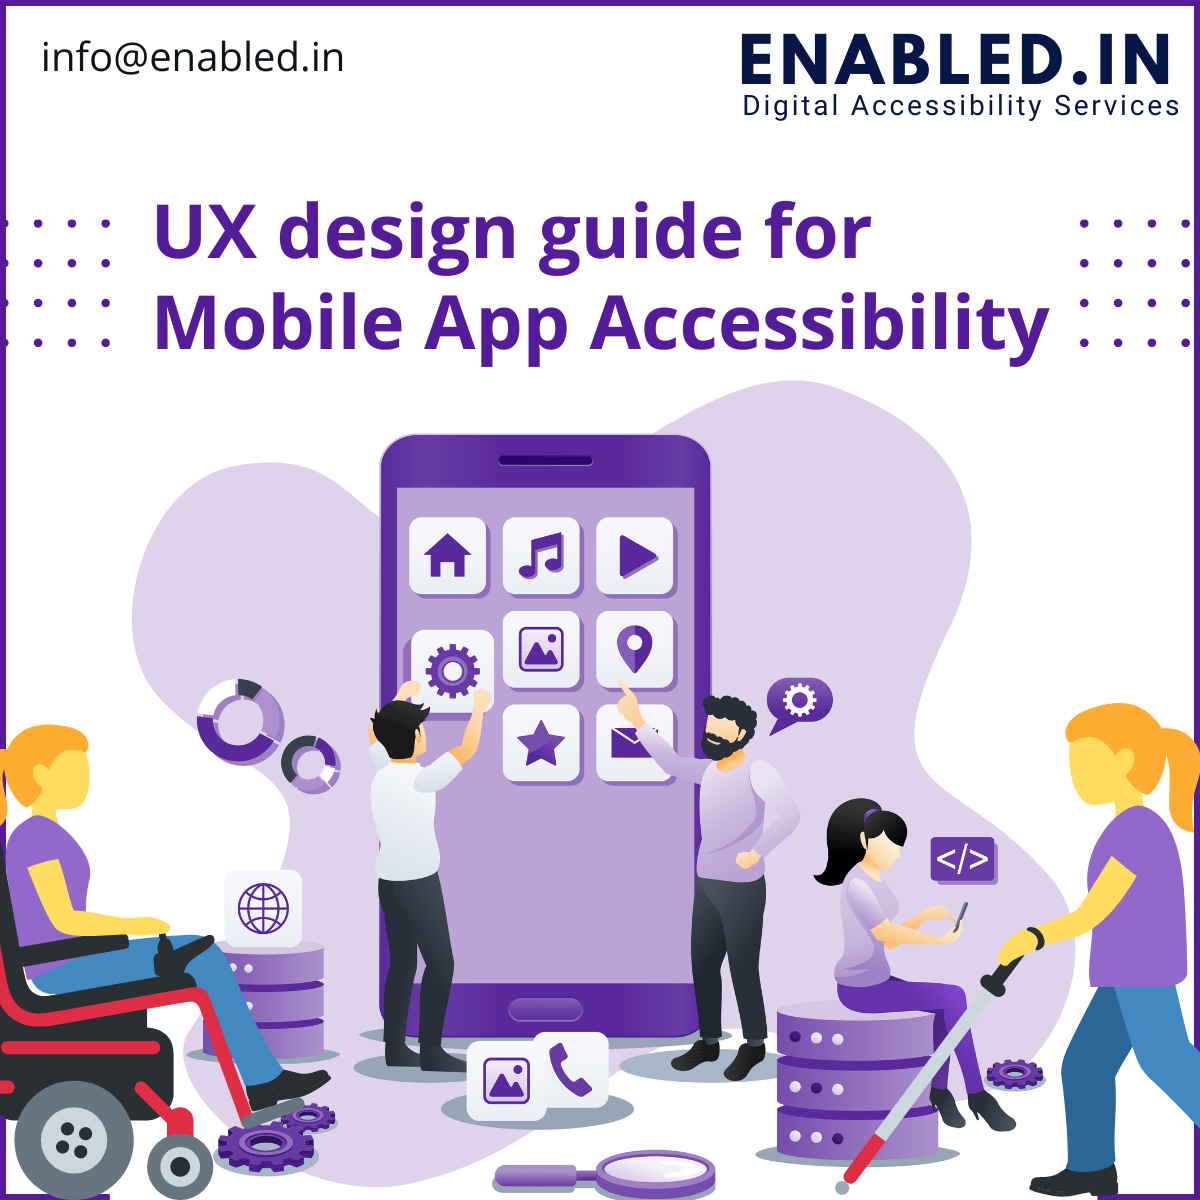 UX design guide for Mobile App Accessibility